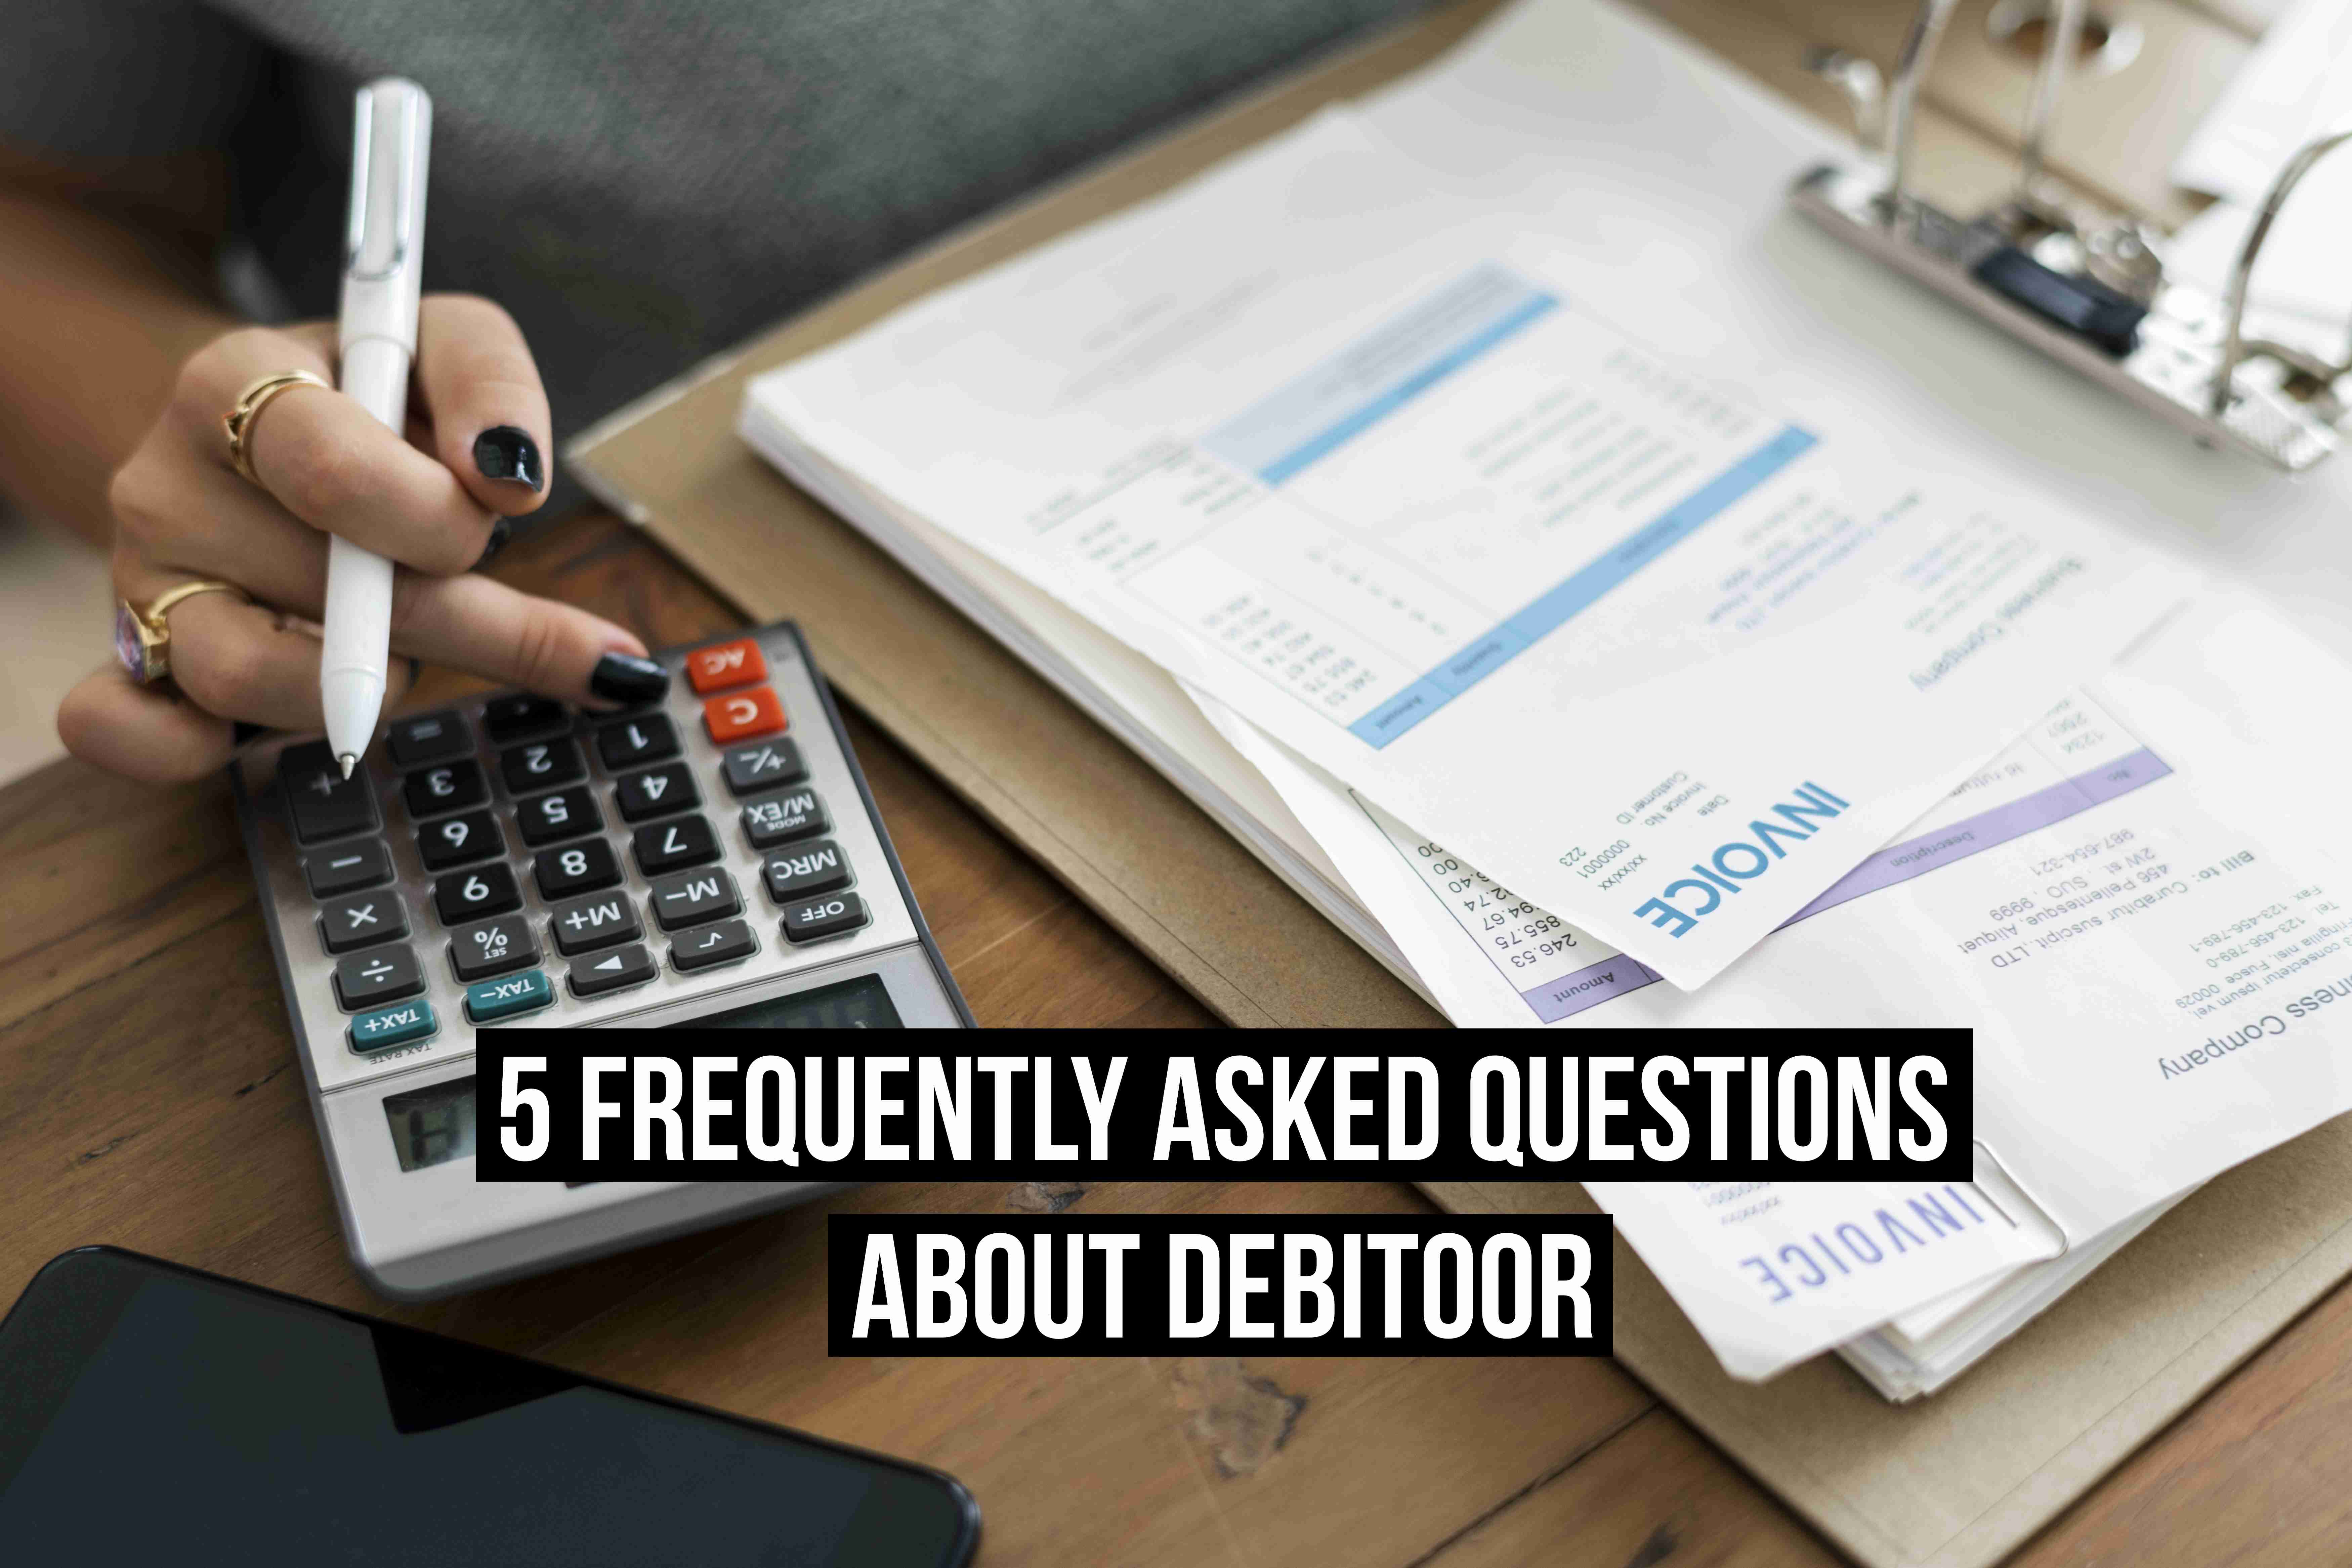 debitoor frequently asked questions title